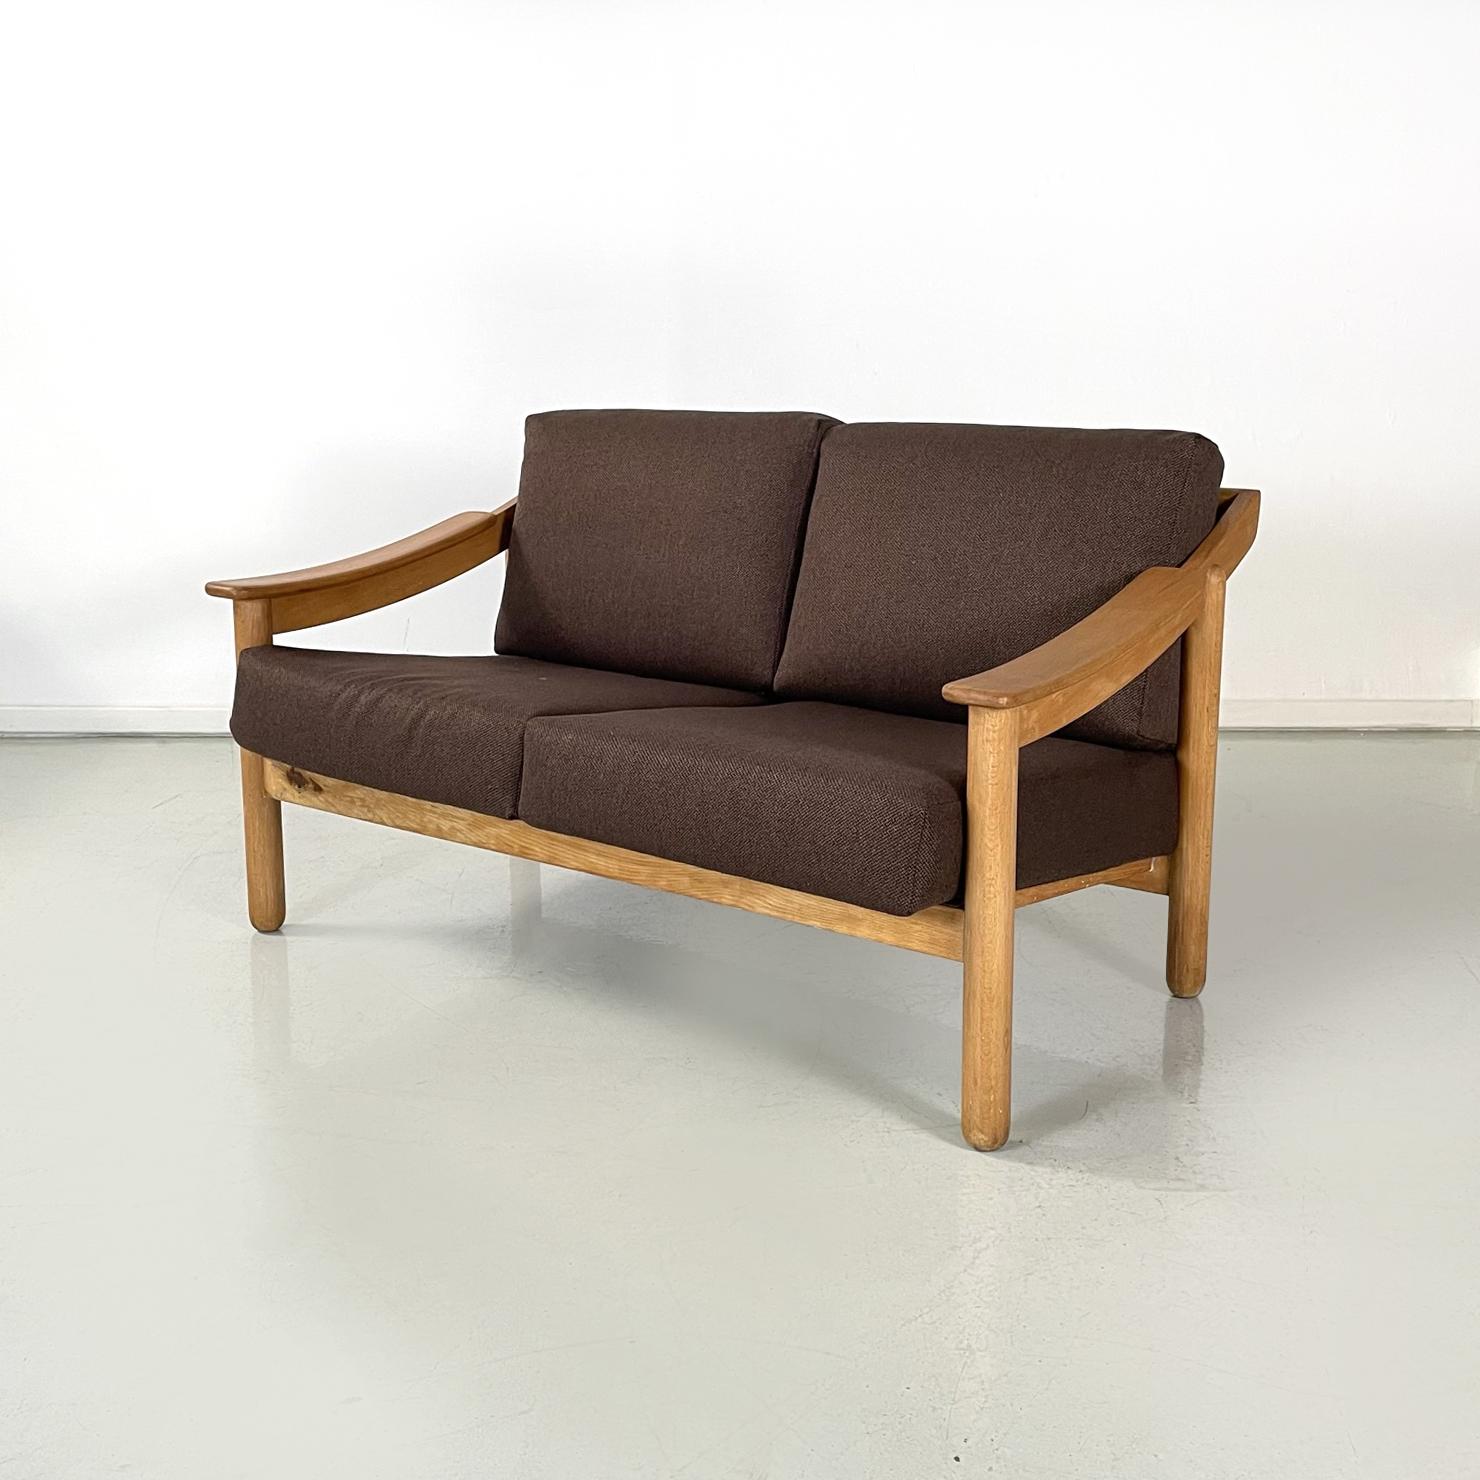 Italian mid-century brown Armchairs and sofa Loden by Vico Magistretti for Cassina, 1960s
Living room set composed of a pair of armchairs and a two-seater sofa mod. Loden with structure in light solid wood. The seat and backrest are made up of